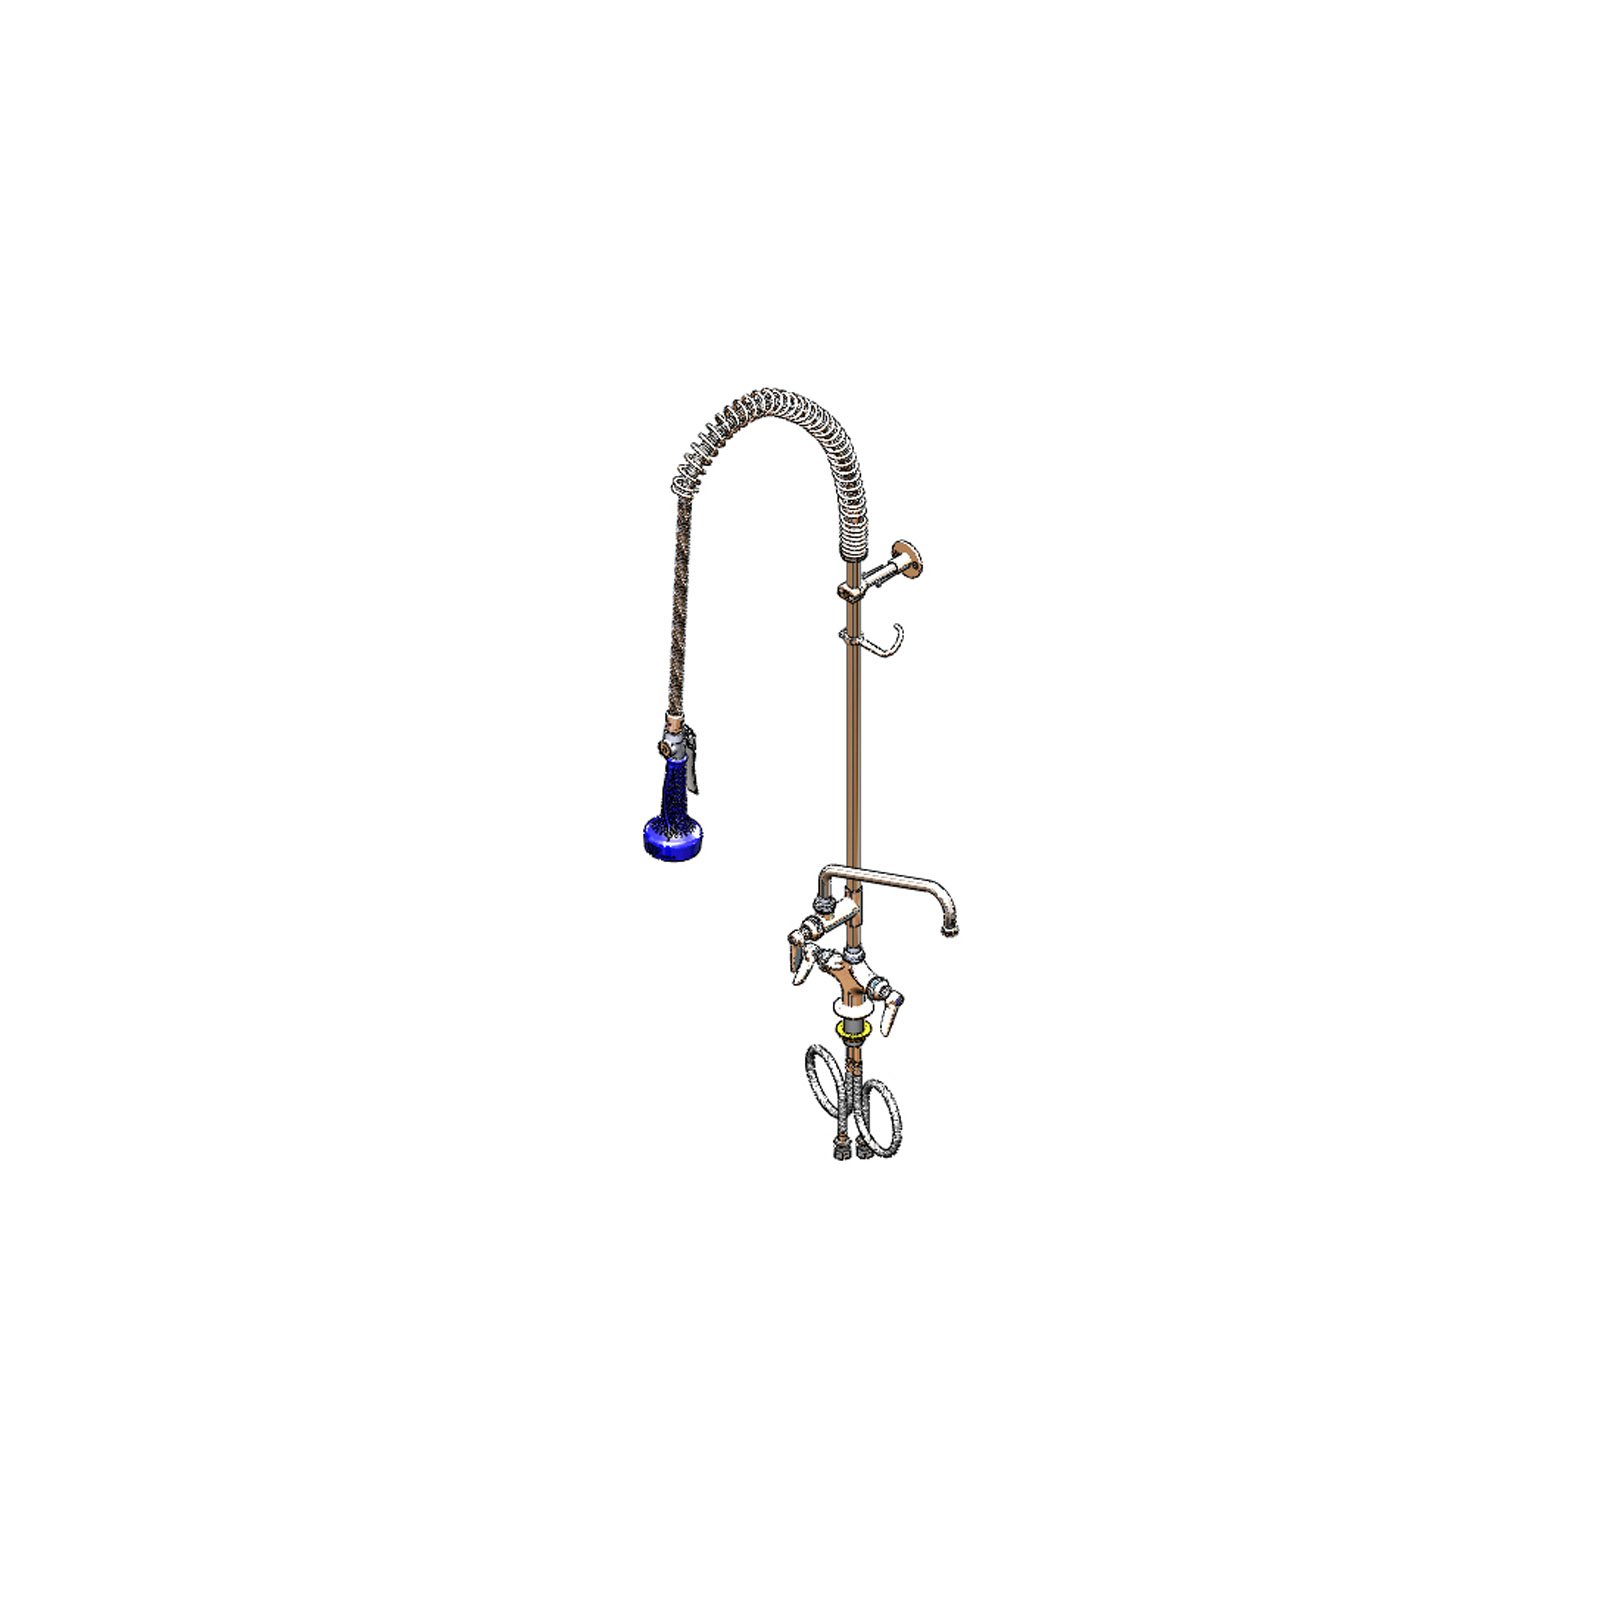 T&S Brass B-0113-A06-B08 with Add On Faucet Pre-Rinse Faucet Assembly